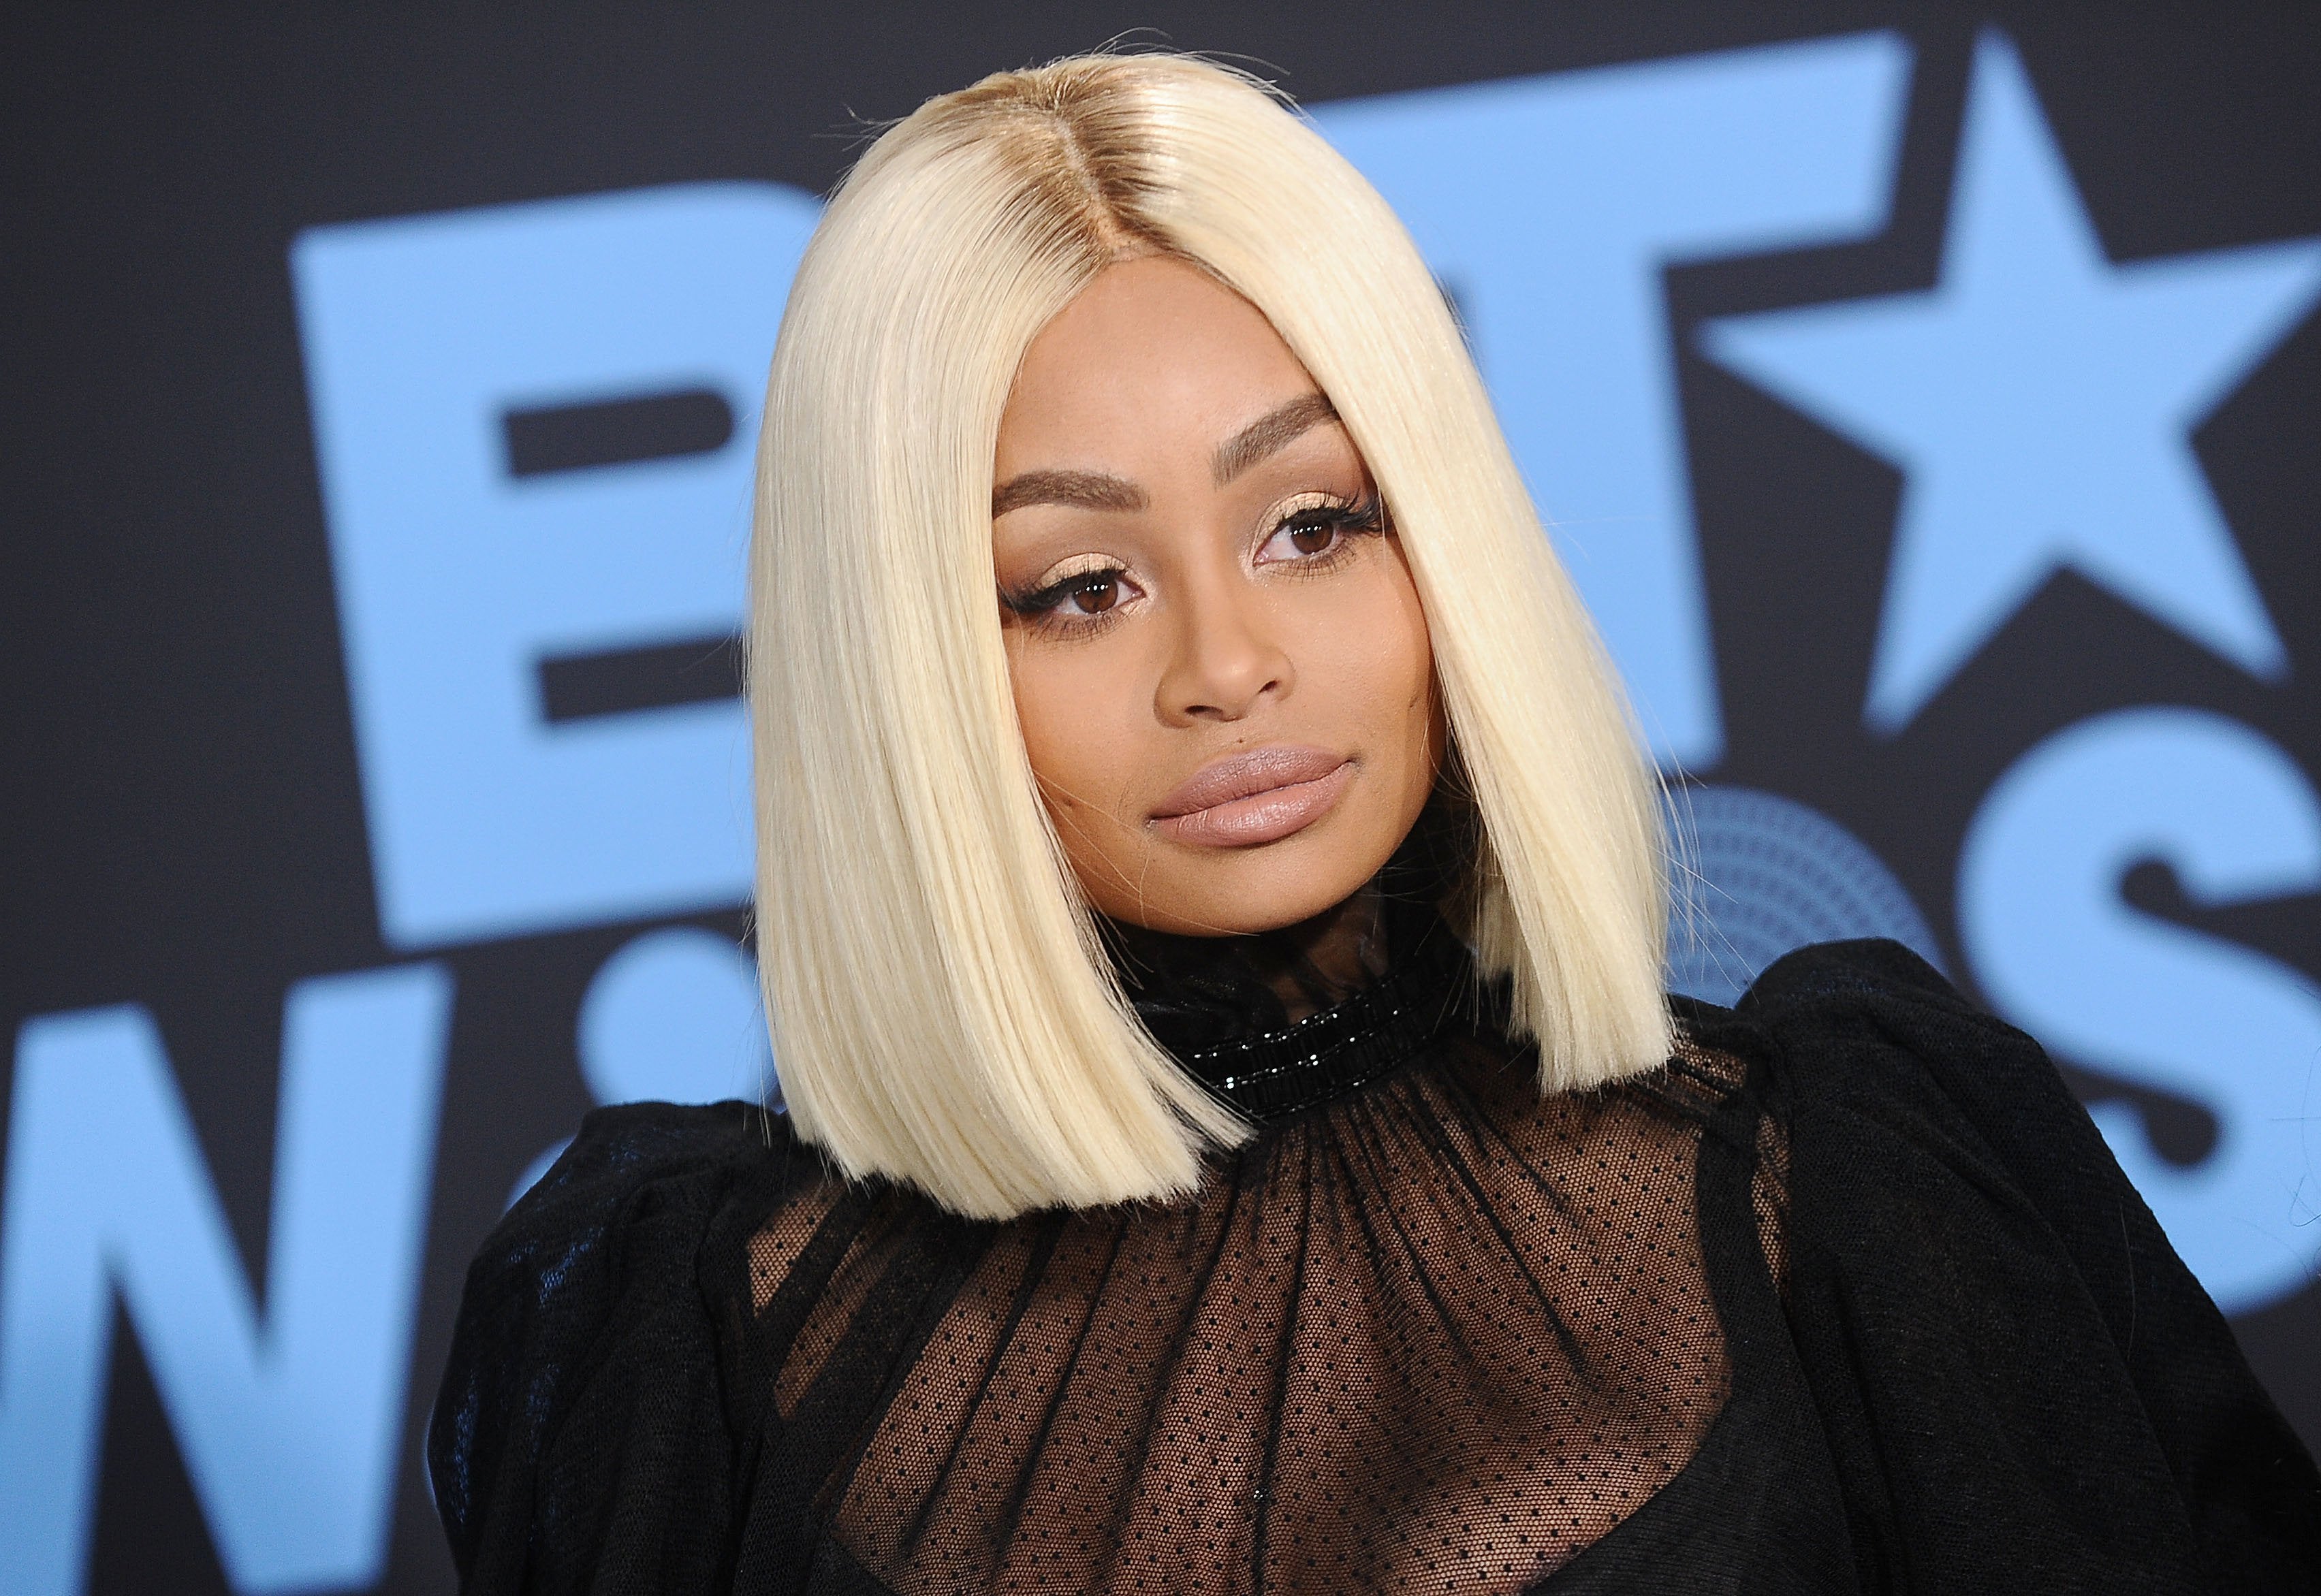 How Blac Chyna Is Handling the Rob Kardashian Drama: 'She's Focused on Herself and Providing for Her Family'